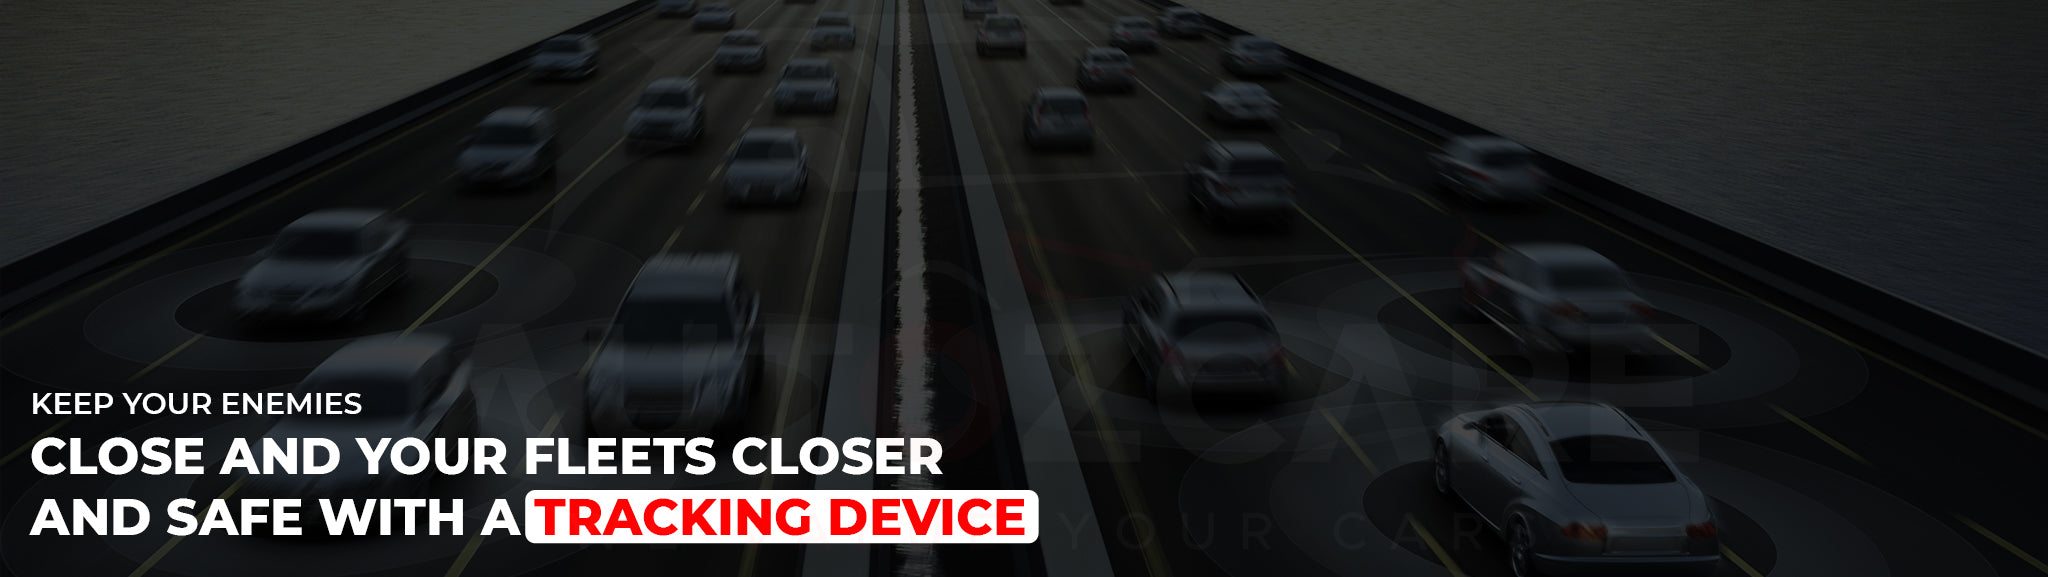 Keep your enemies close and your fleets closer and safe with a tracking device